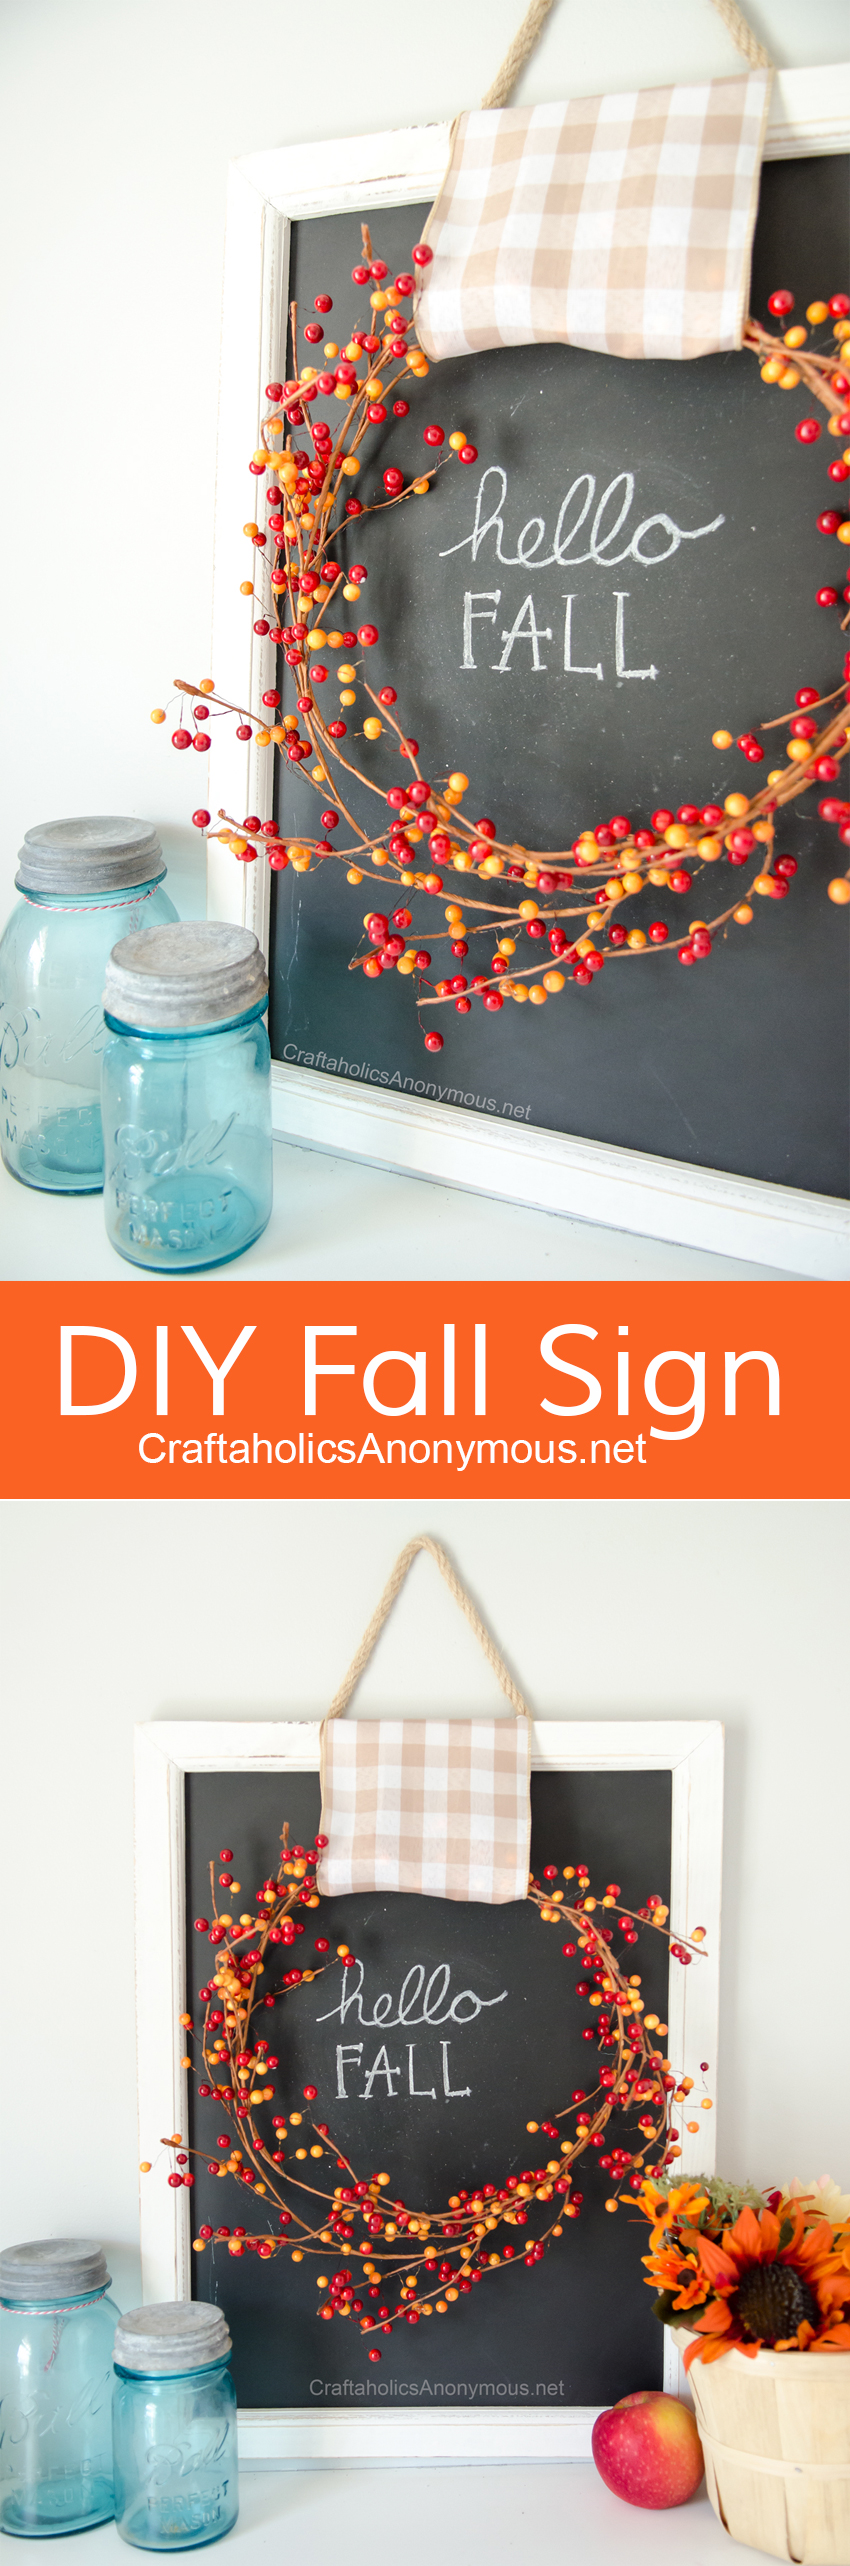 DIY Fall Sign :: Love the berry wreath with the gingham ribbon